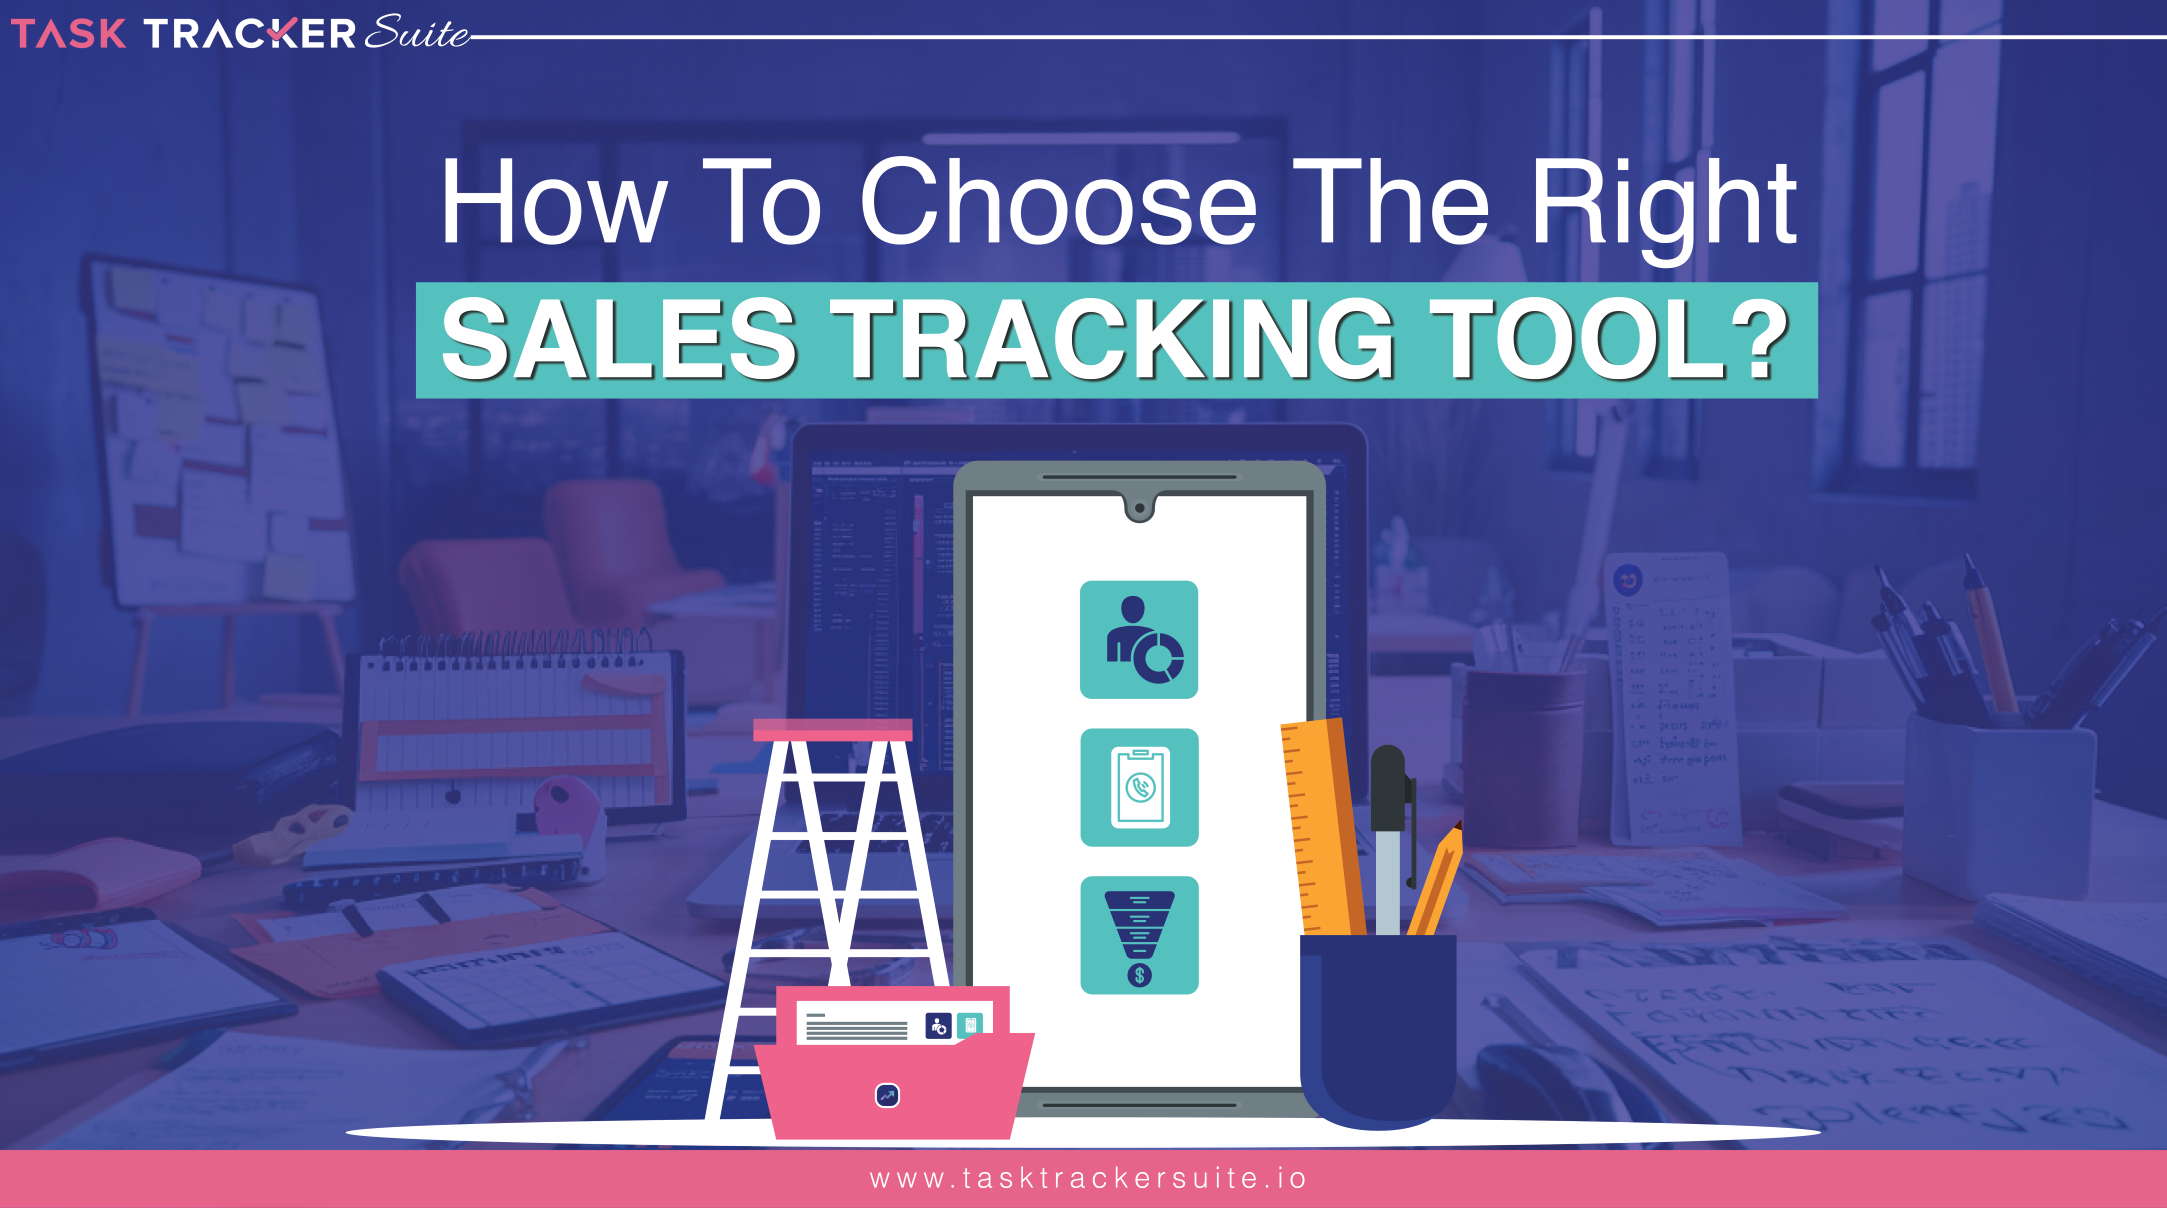 How To Choose The Right Sales Tracking Tool?